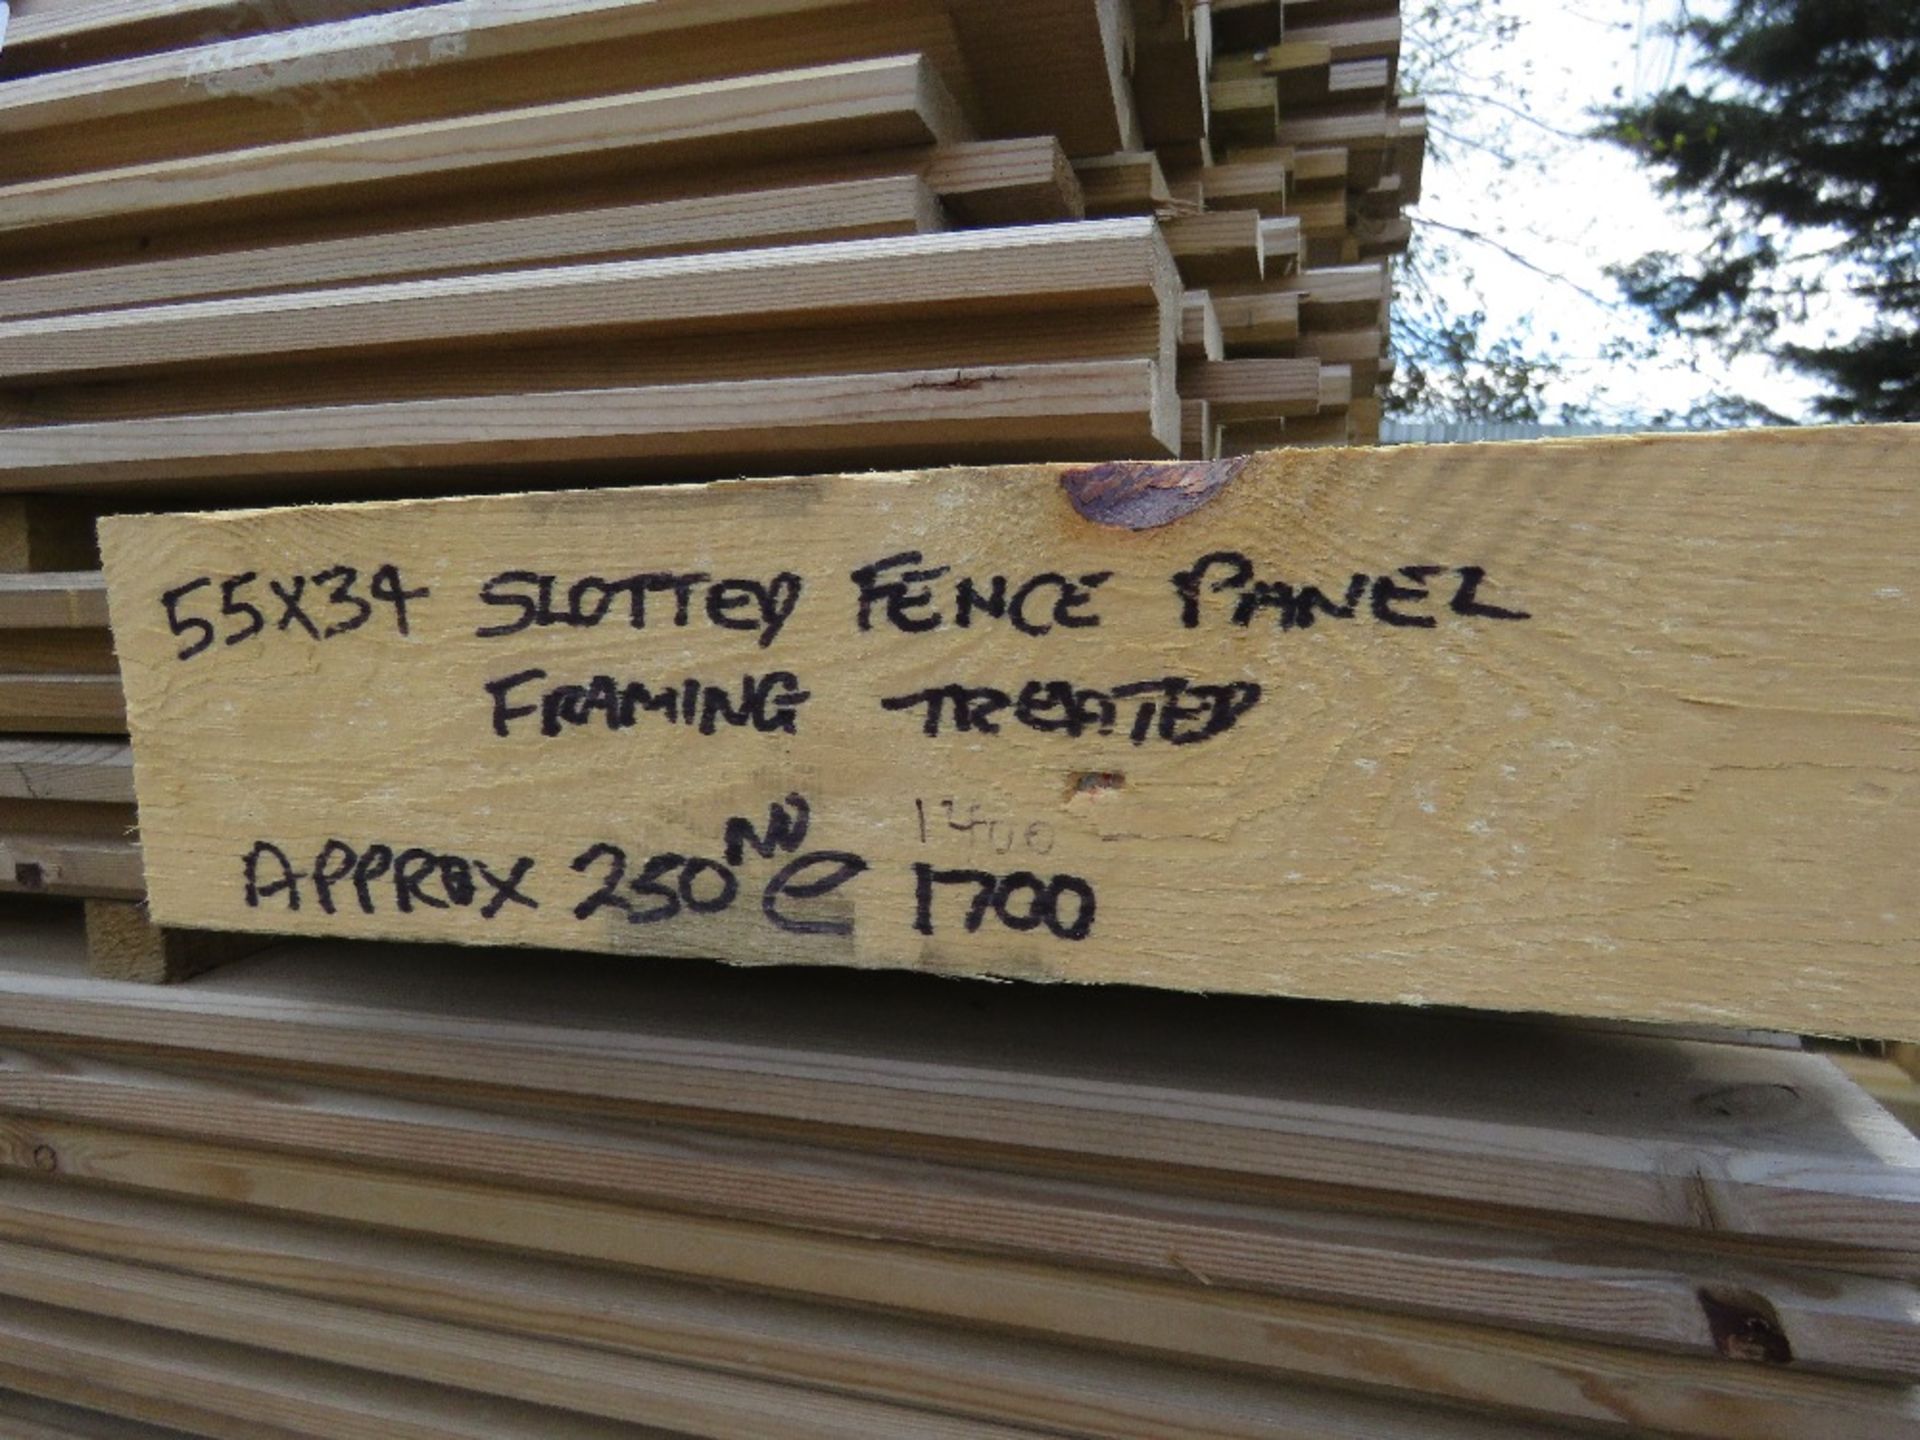 PACK OF TREATED TIMBER FENCE PANEL FRAME SLOTTED TIMBERS: 55MM X 35MM @ 1.4M-1.7M LENGTH APPROX. - Image 3 of 3